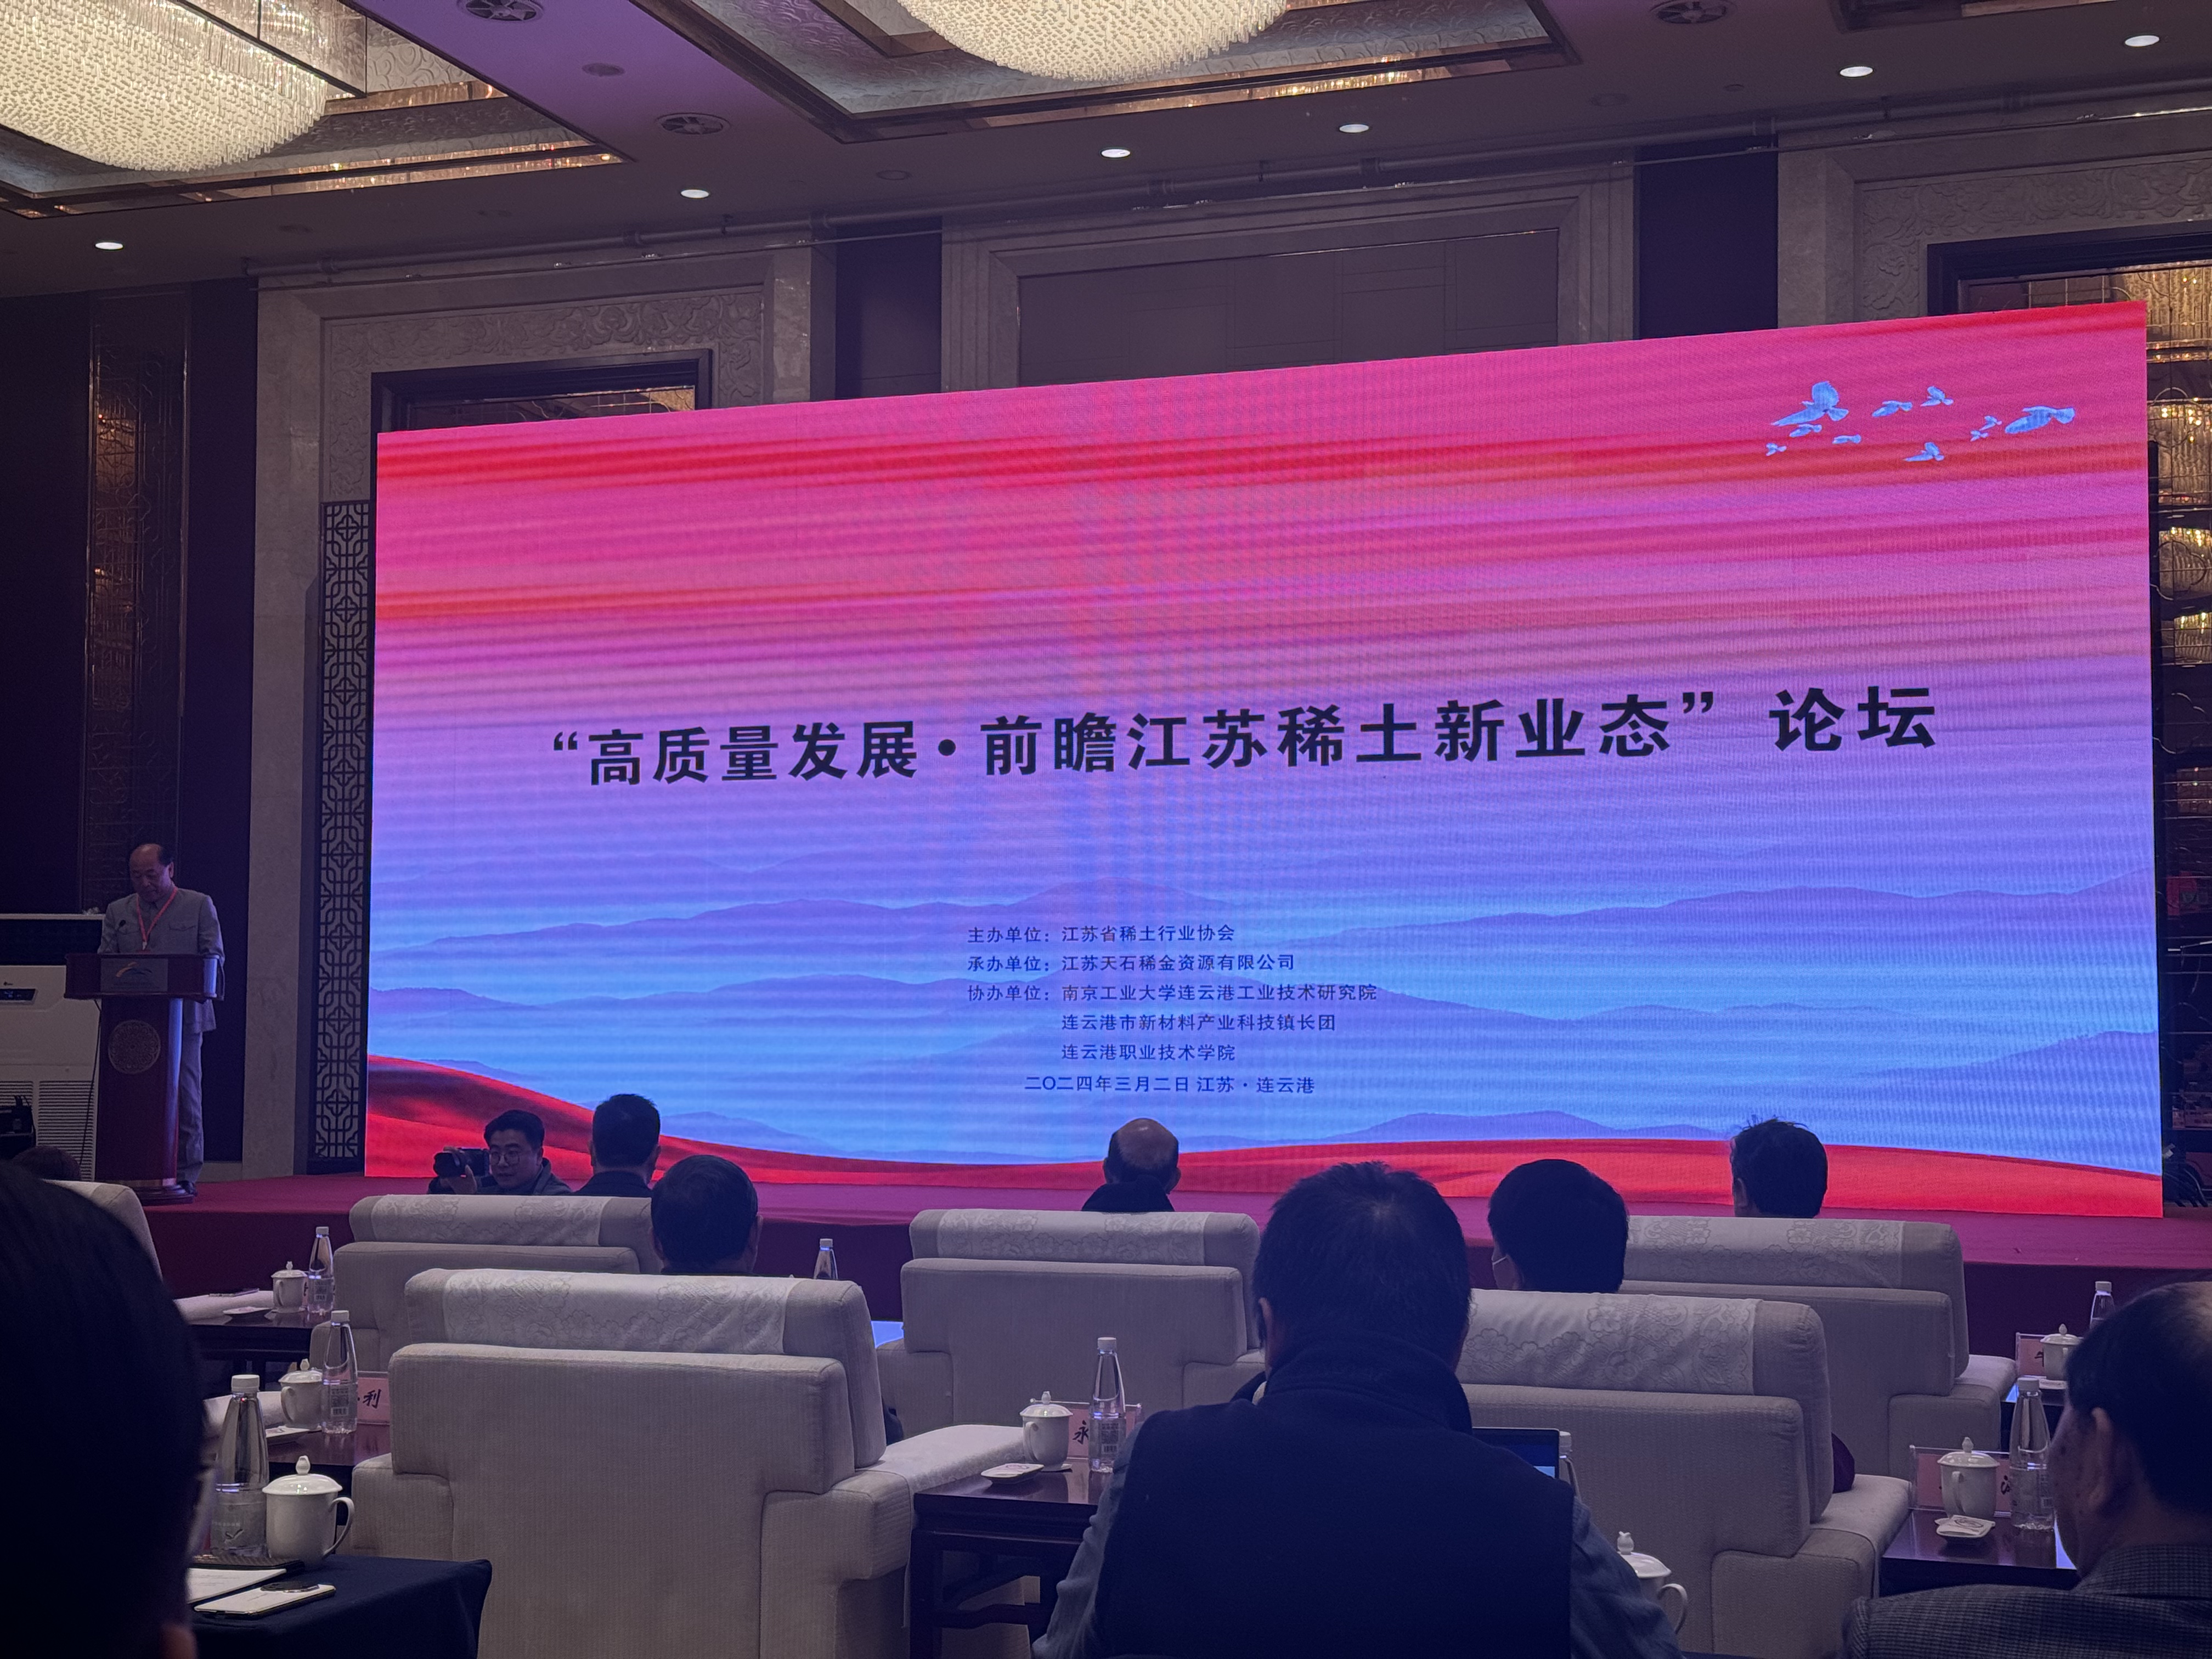 Invited to participate in the Lianyungang Rare Earth Conference